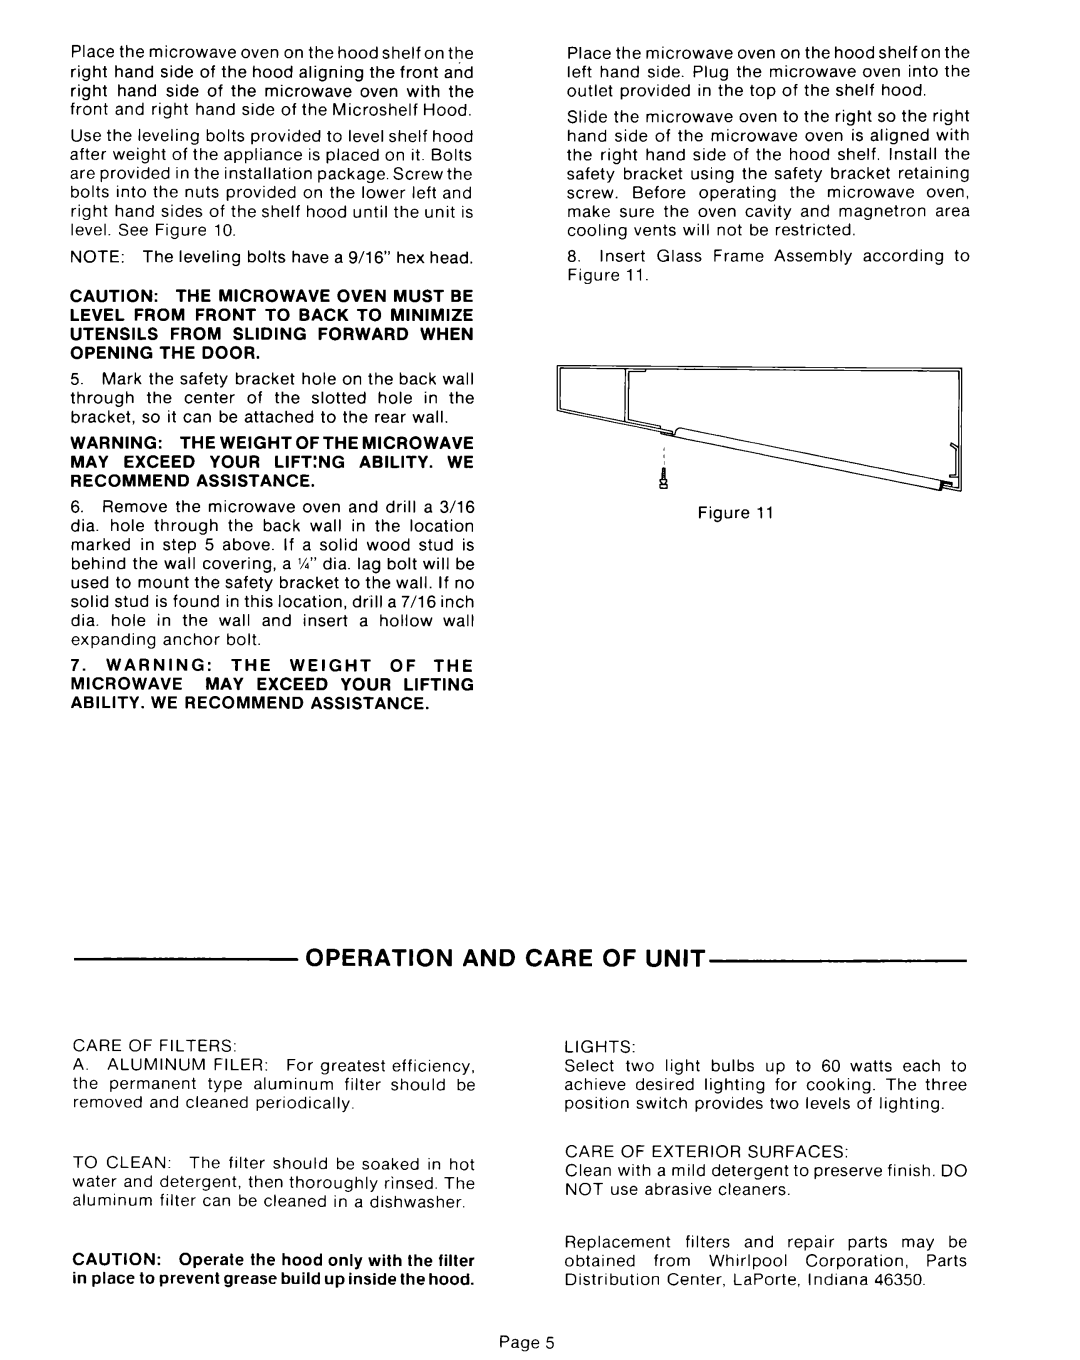 Whirlpool RJH 3330-1 operating instructions Operation And Care Of Unit 